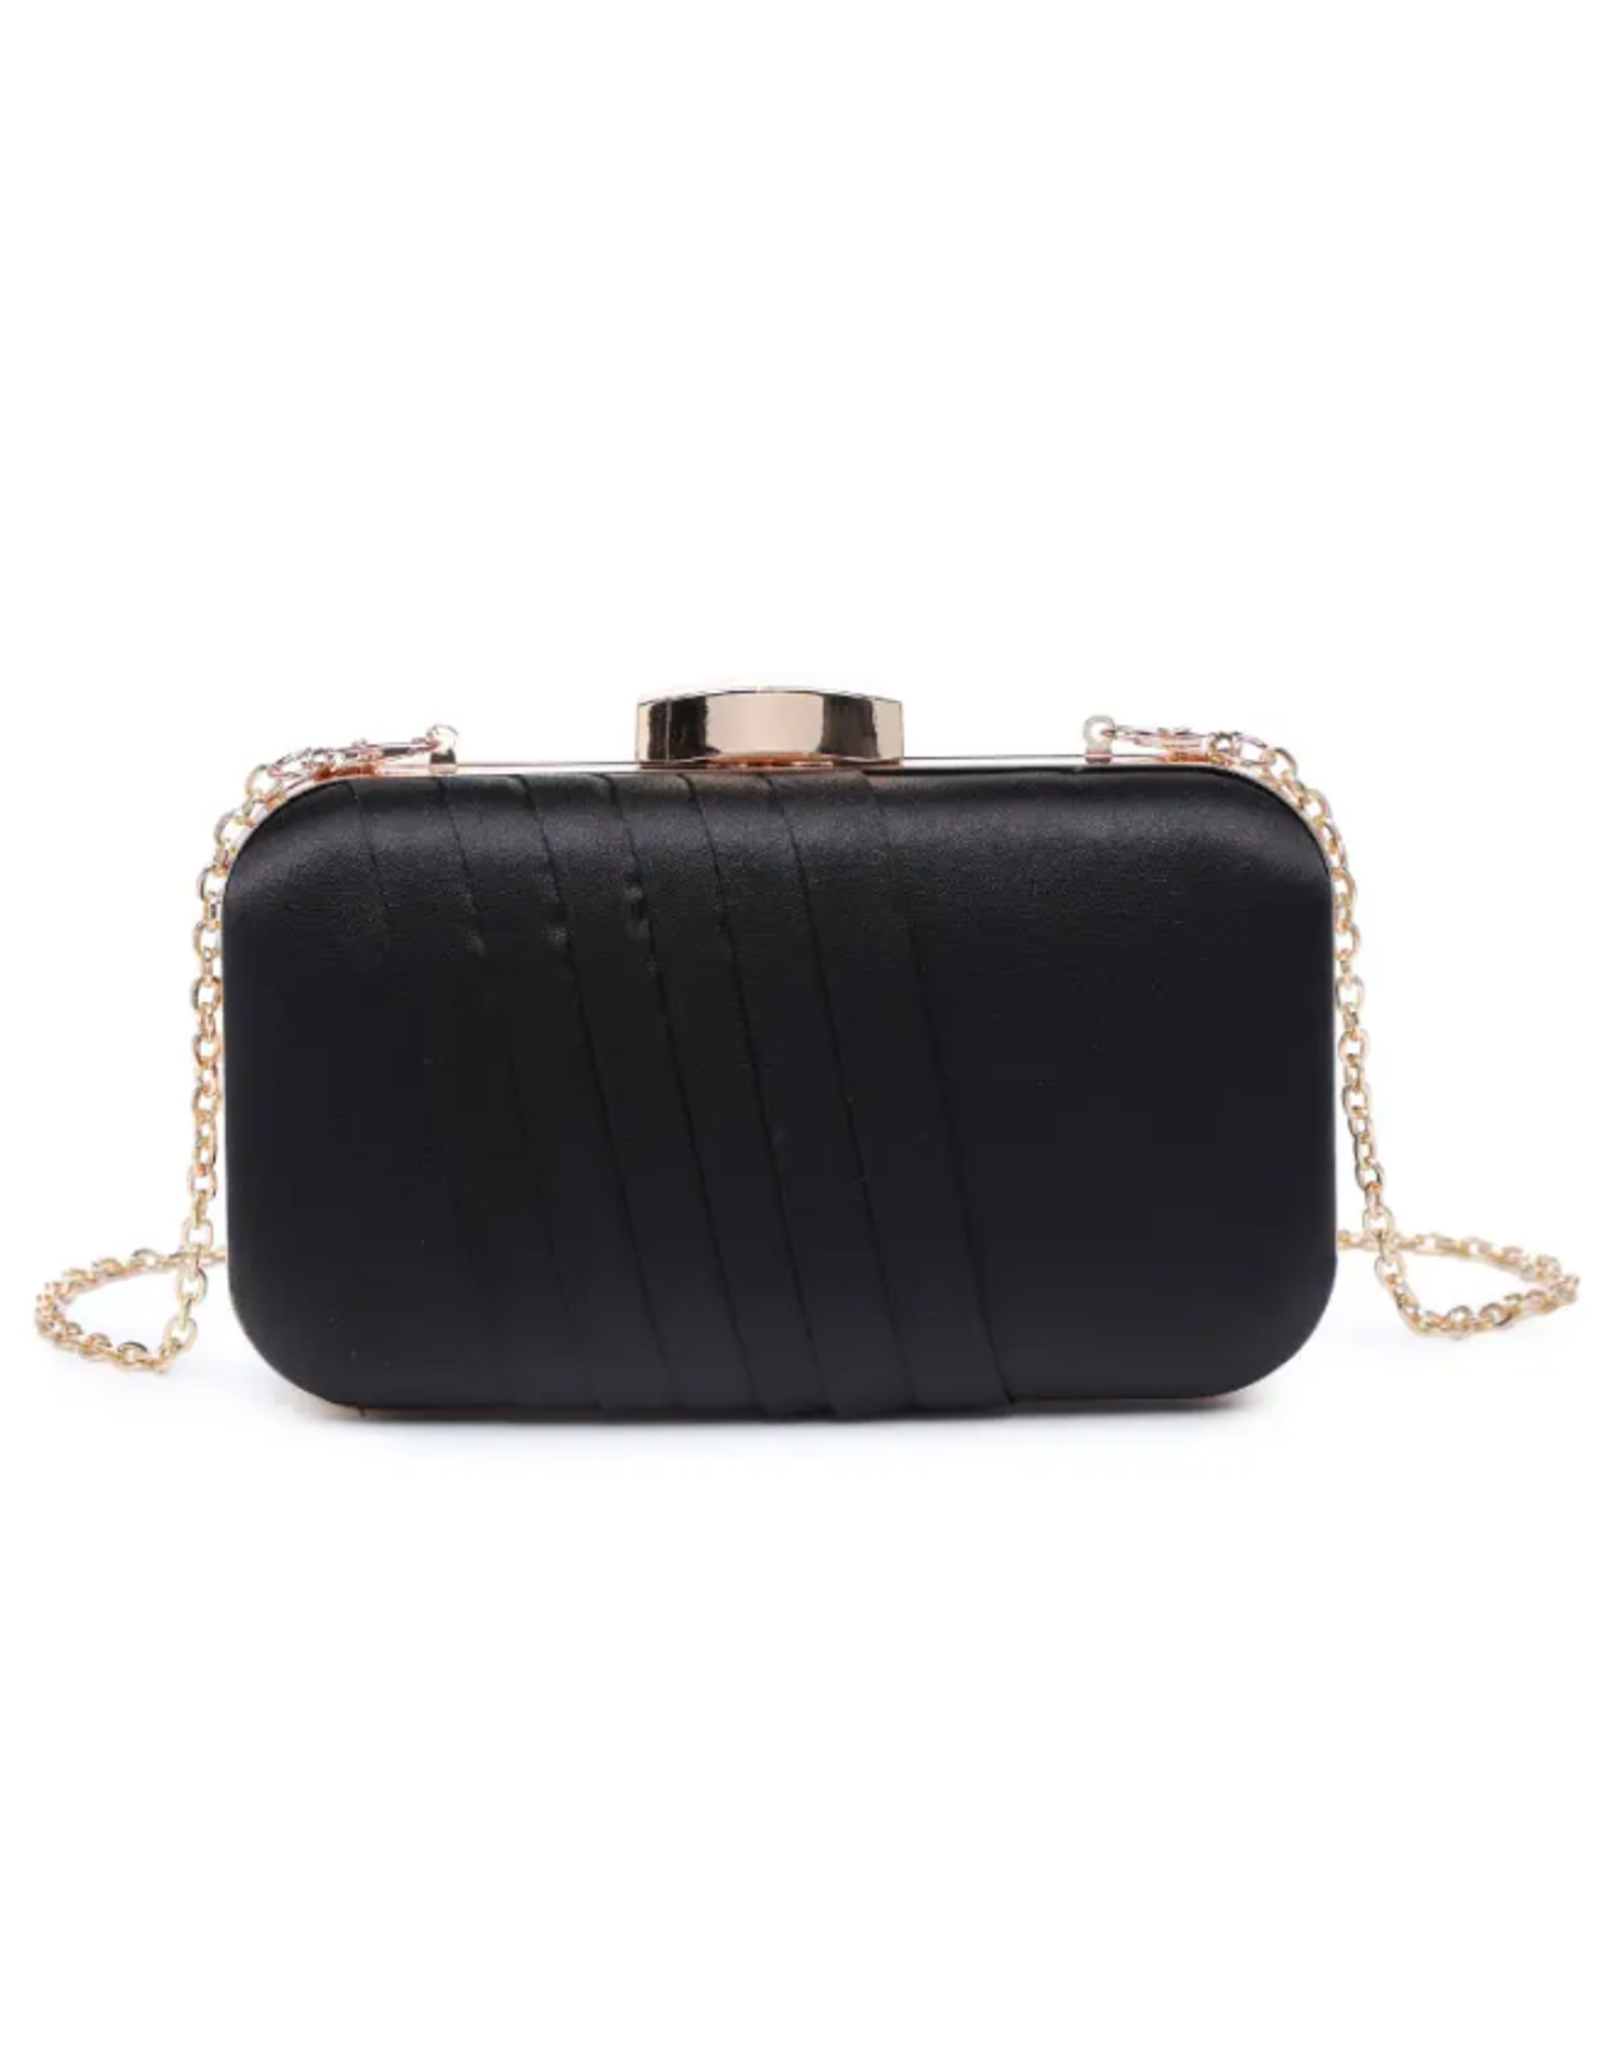 Pleated Black Evening Clutch